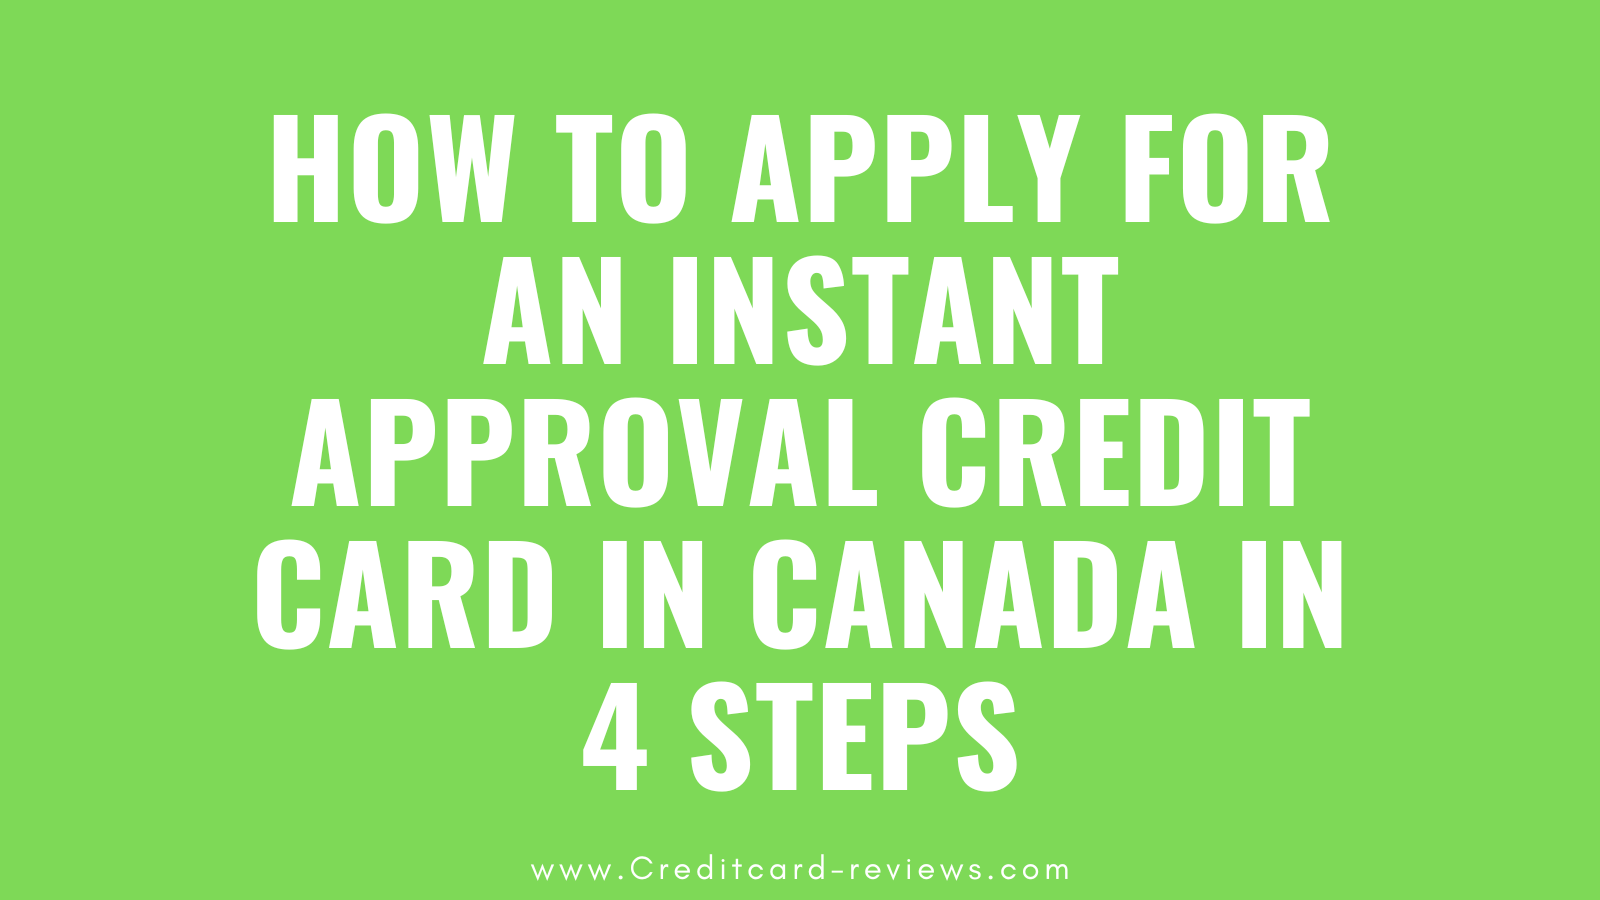 How To Apply For An Instant Approval Credit Card in Canada in 4 steps